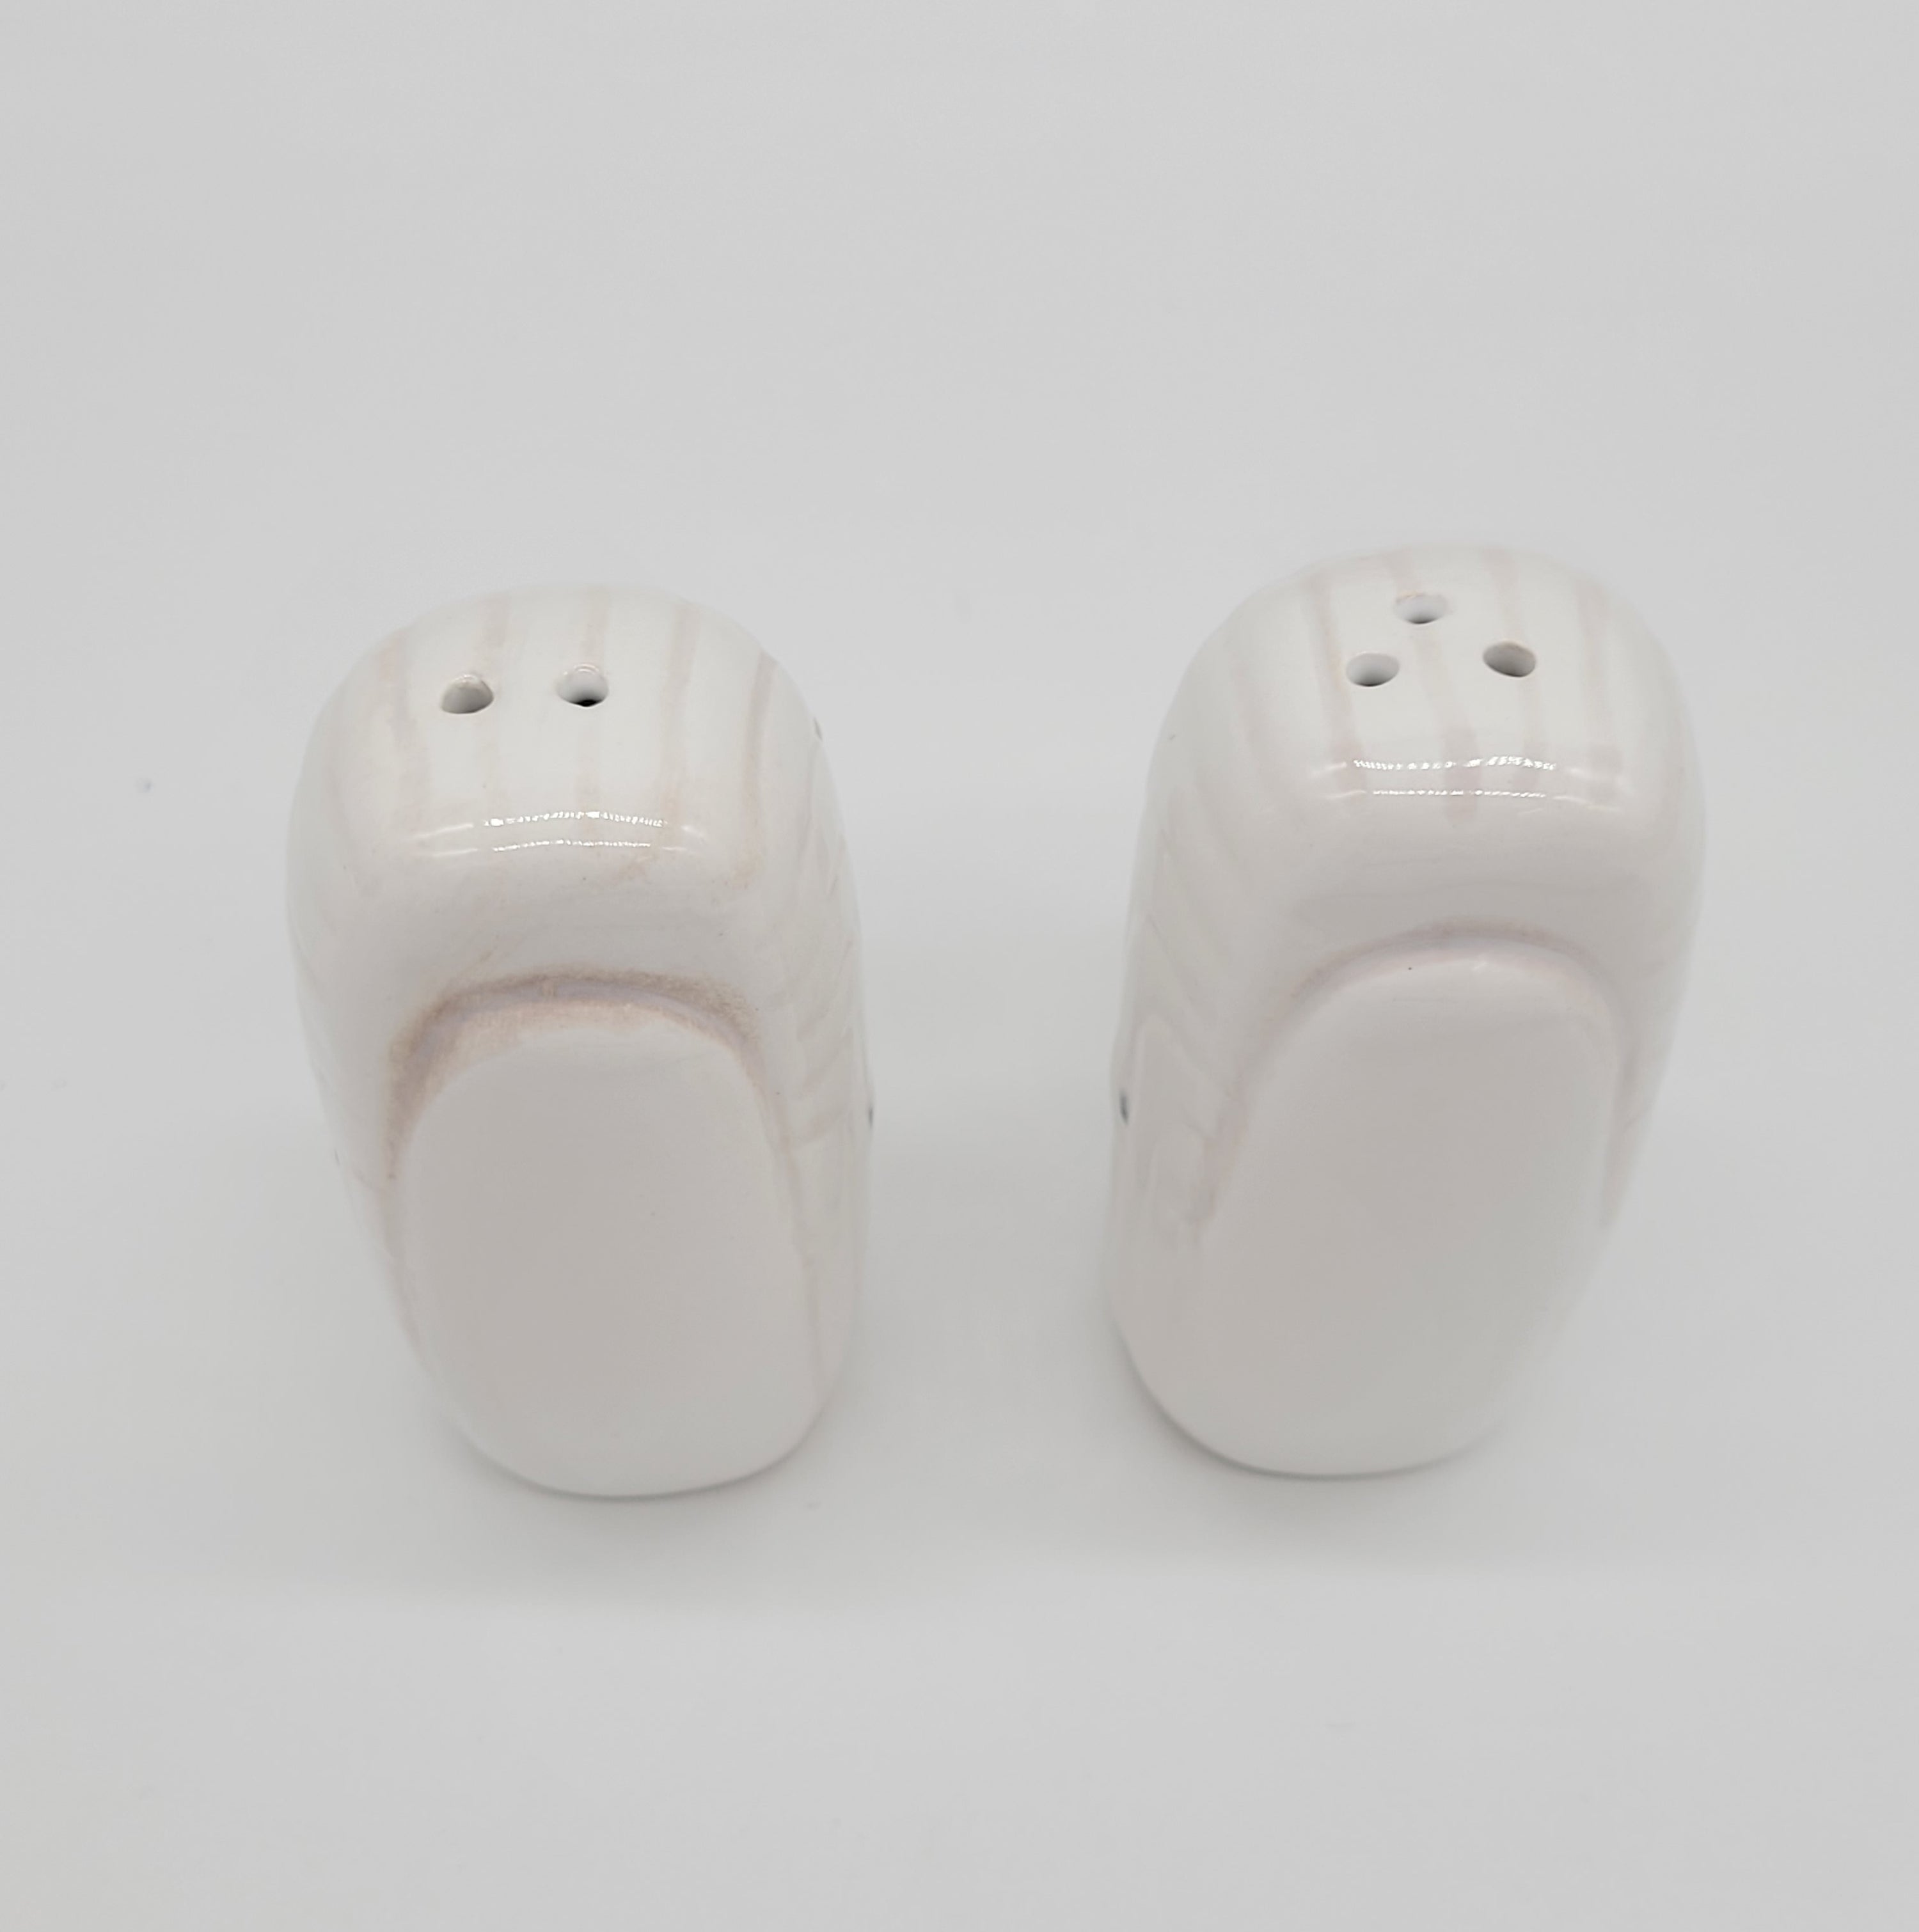 WHALE SALT AND PEPPER SHAKERS